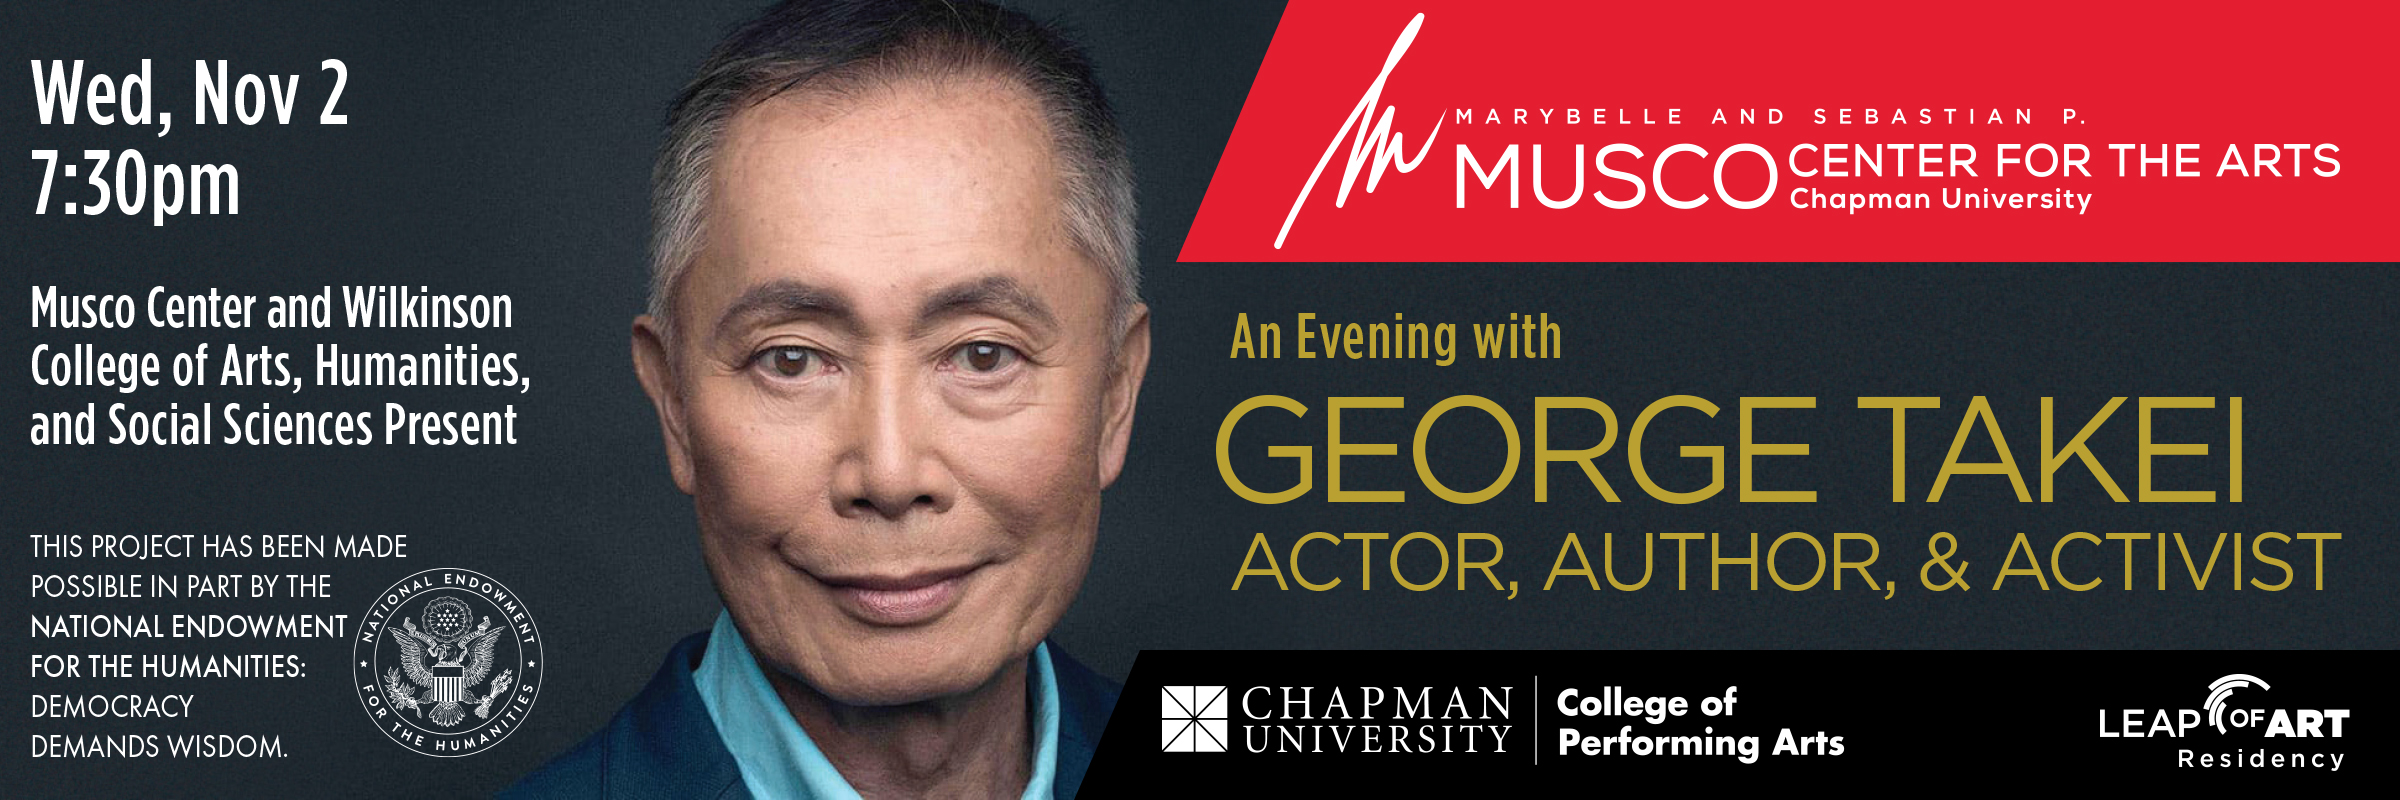 Marybelle and Sebastian P. Musco Center for the Arts. Chapman University. College of Performing Arts. Musco Center and Wilkinson College of Arts, Humanities, and Social Sciences Present An Evening with George Takei, Actor, Author, and Activist. Portrait photo of George Takei.